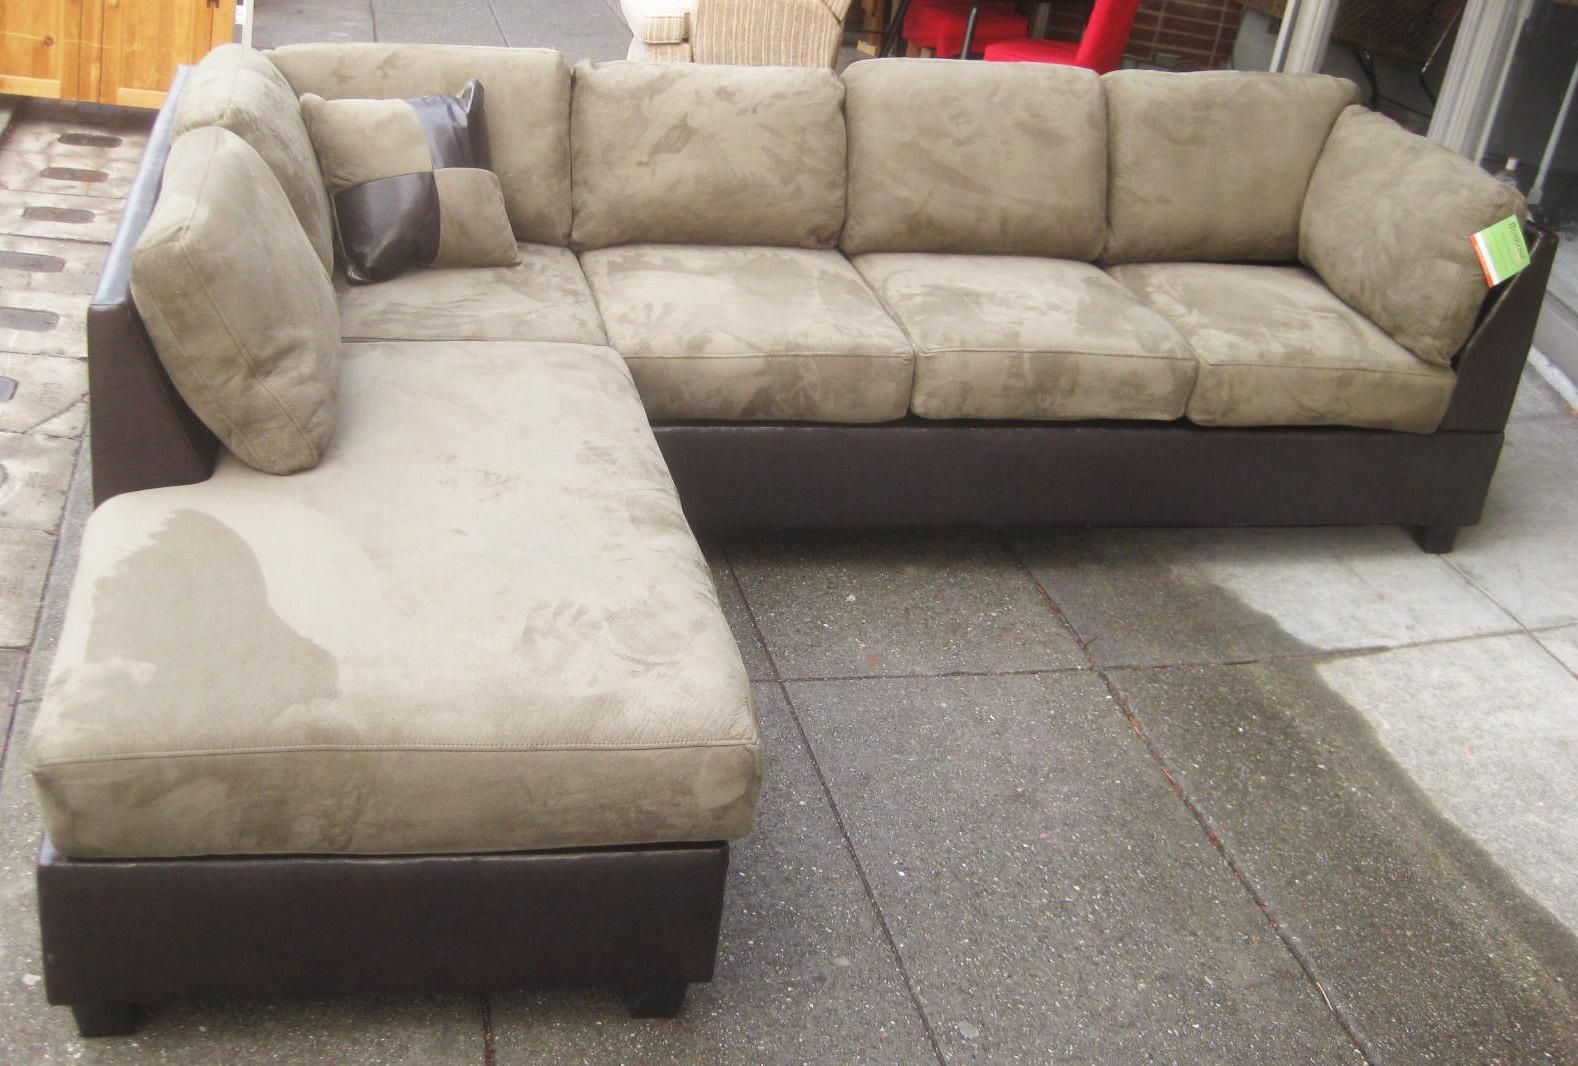 Interior: Impressive Microsuede Sectional Collections Sets For Throughout Microfiber Suede Sectional (View 5 of 20)